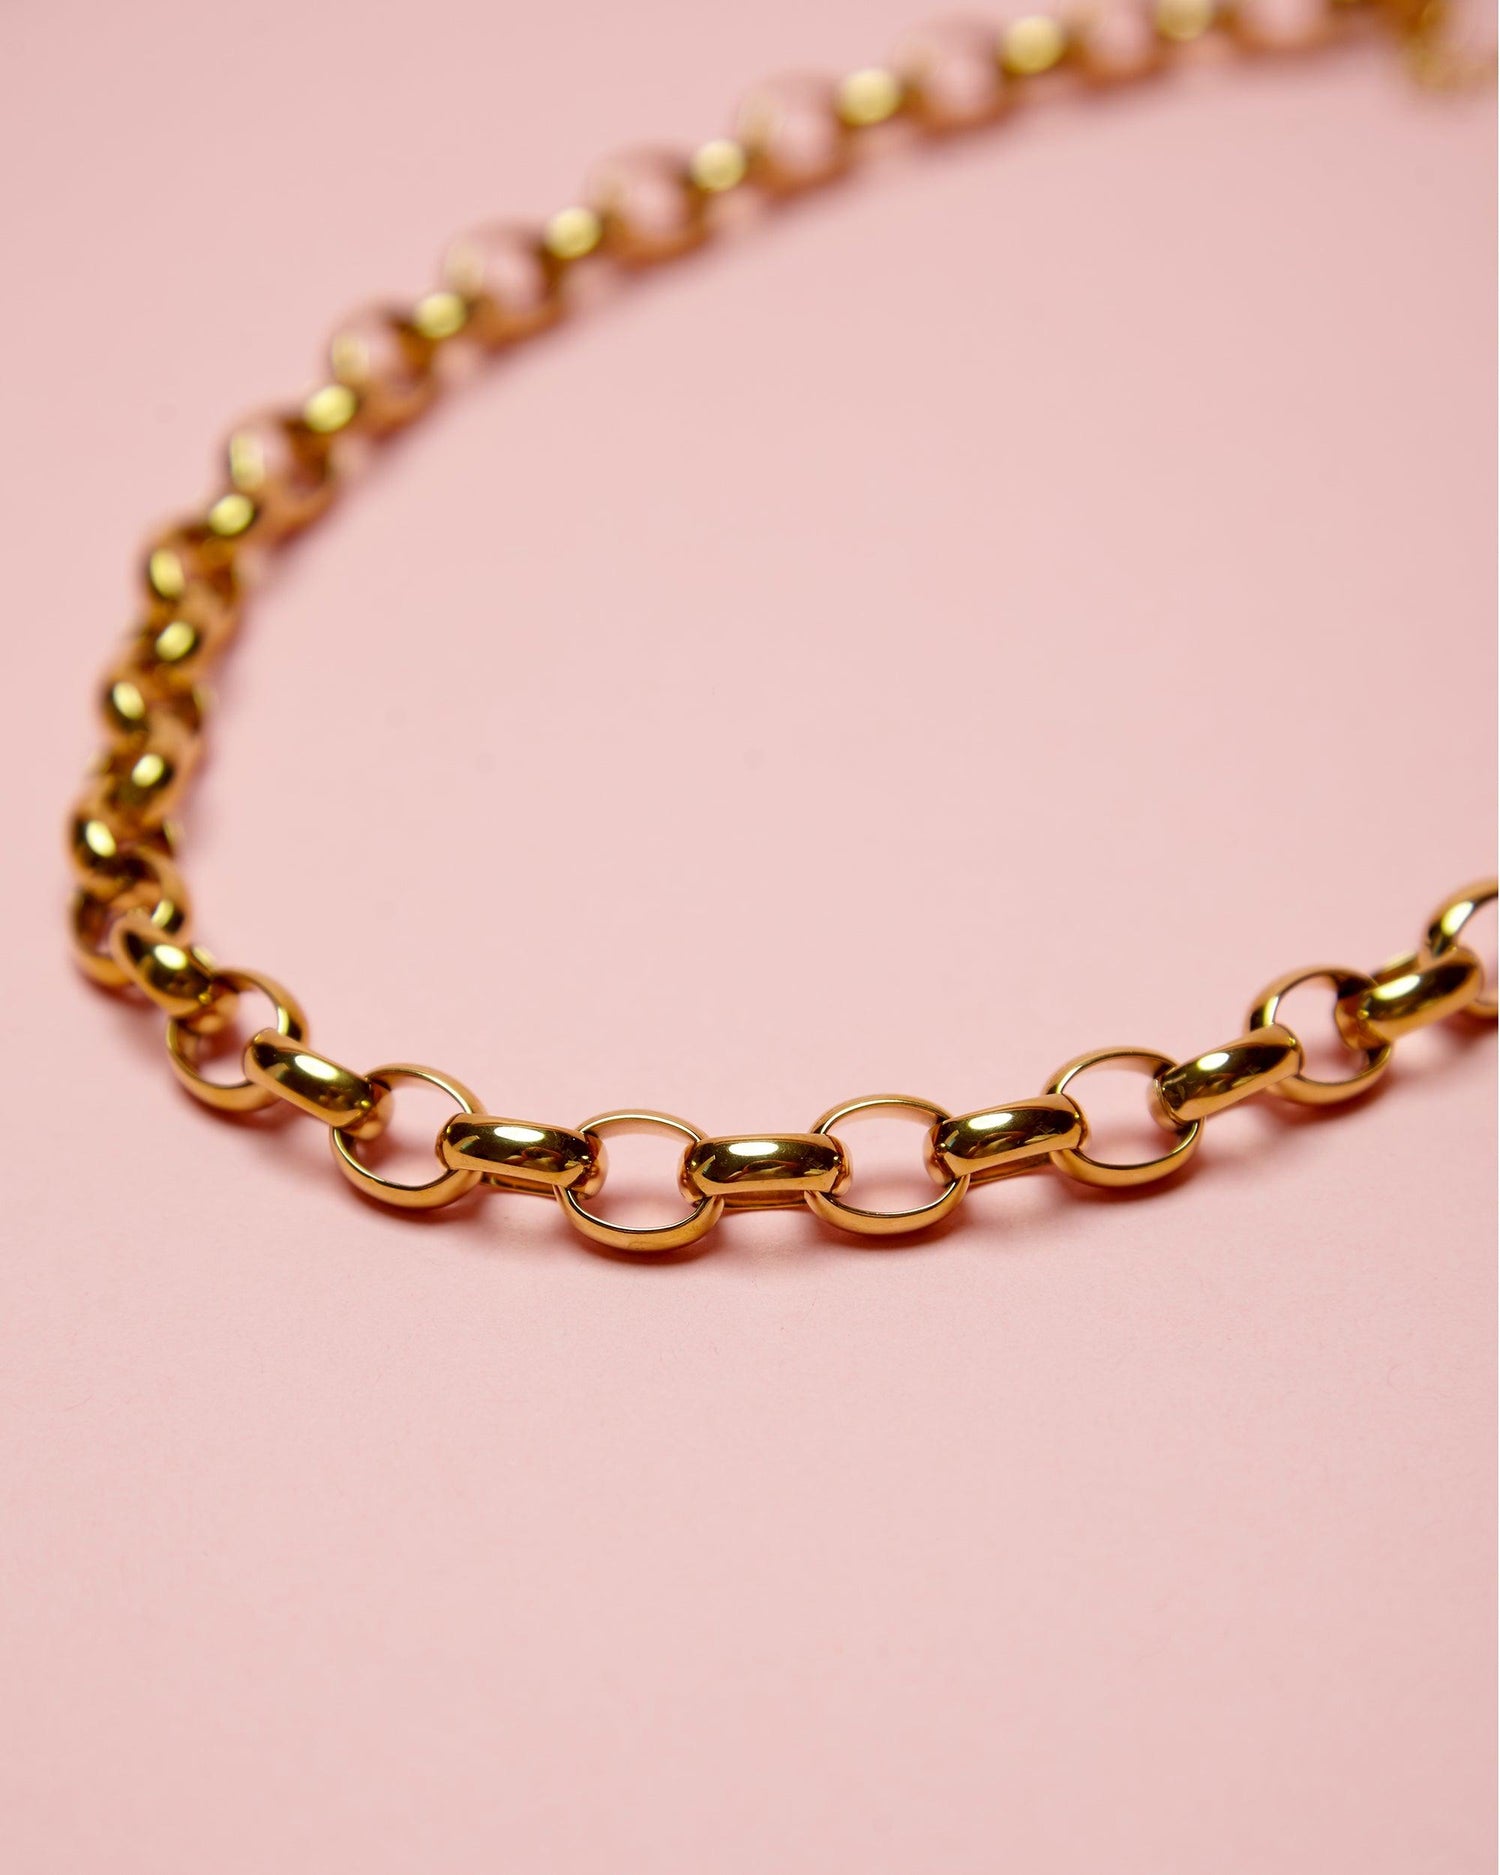 Chunky chain, gold plated stainless steel - Necklace - HOMOLONDON